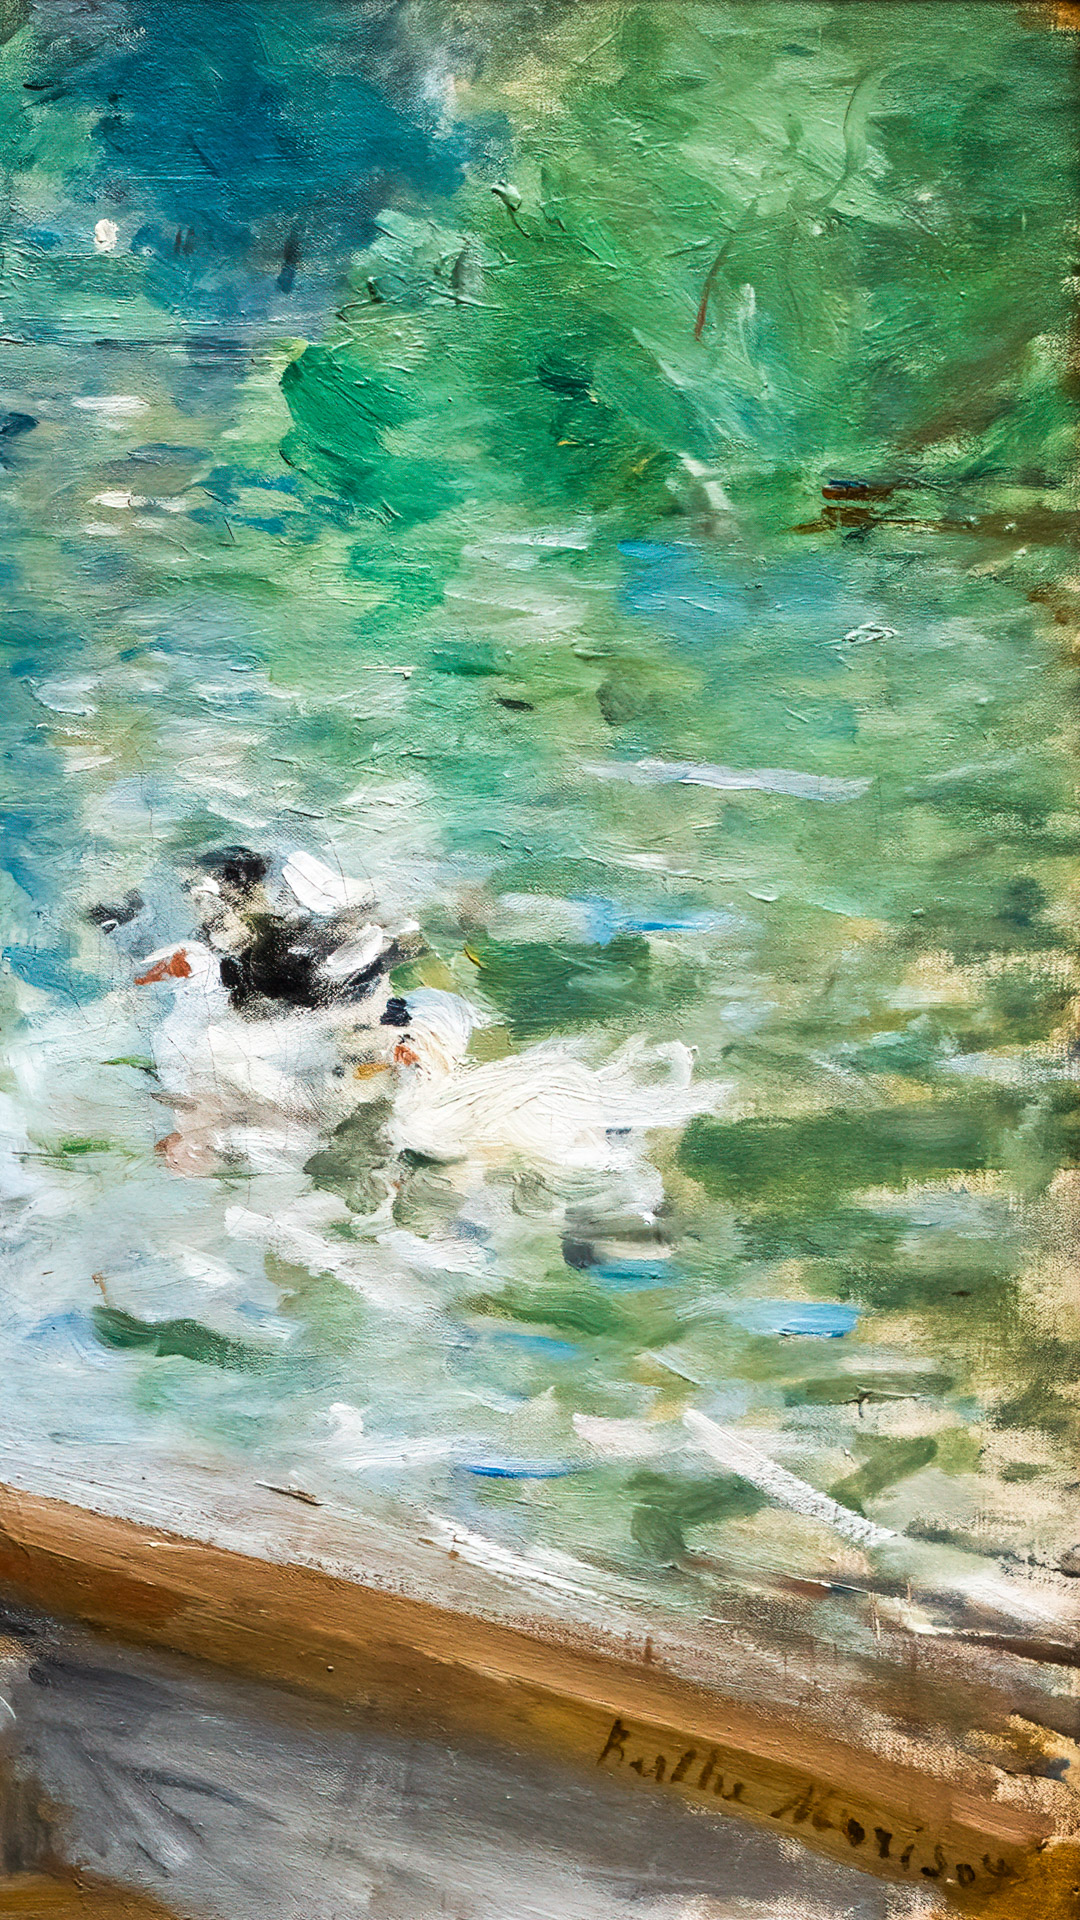 Let the soft hues of Berthe Morisot's impressionism grace your Android device with elegance.